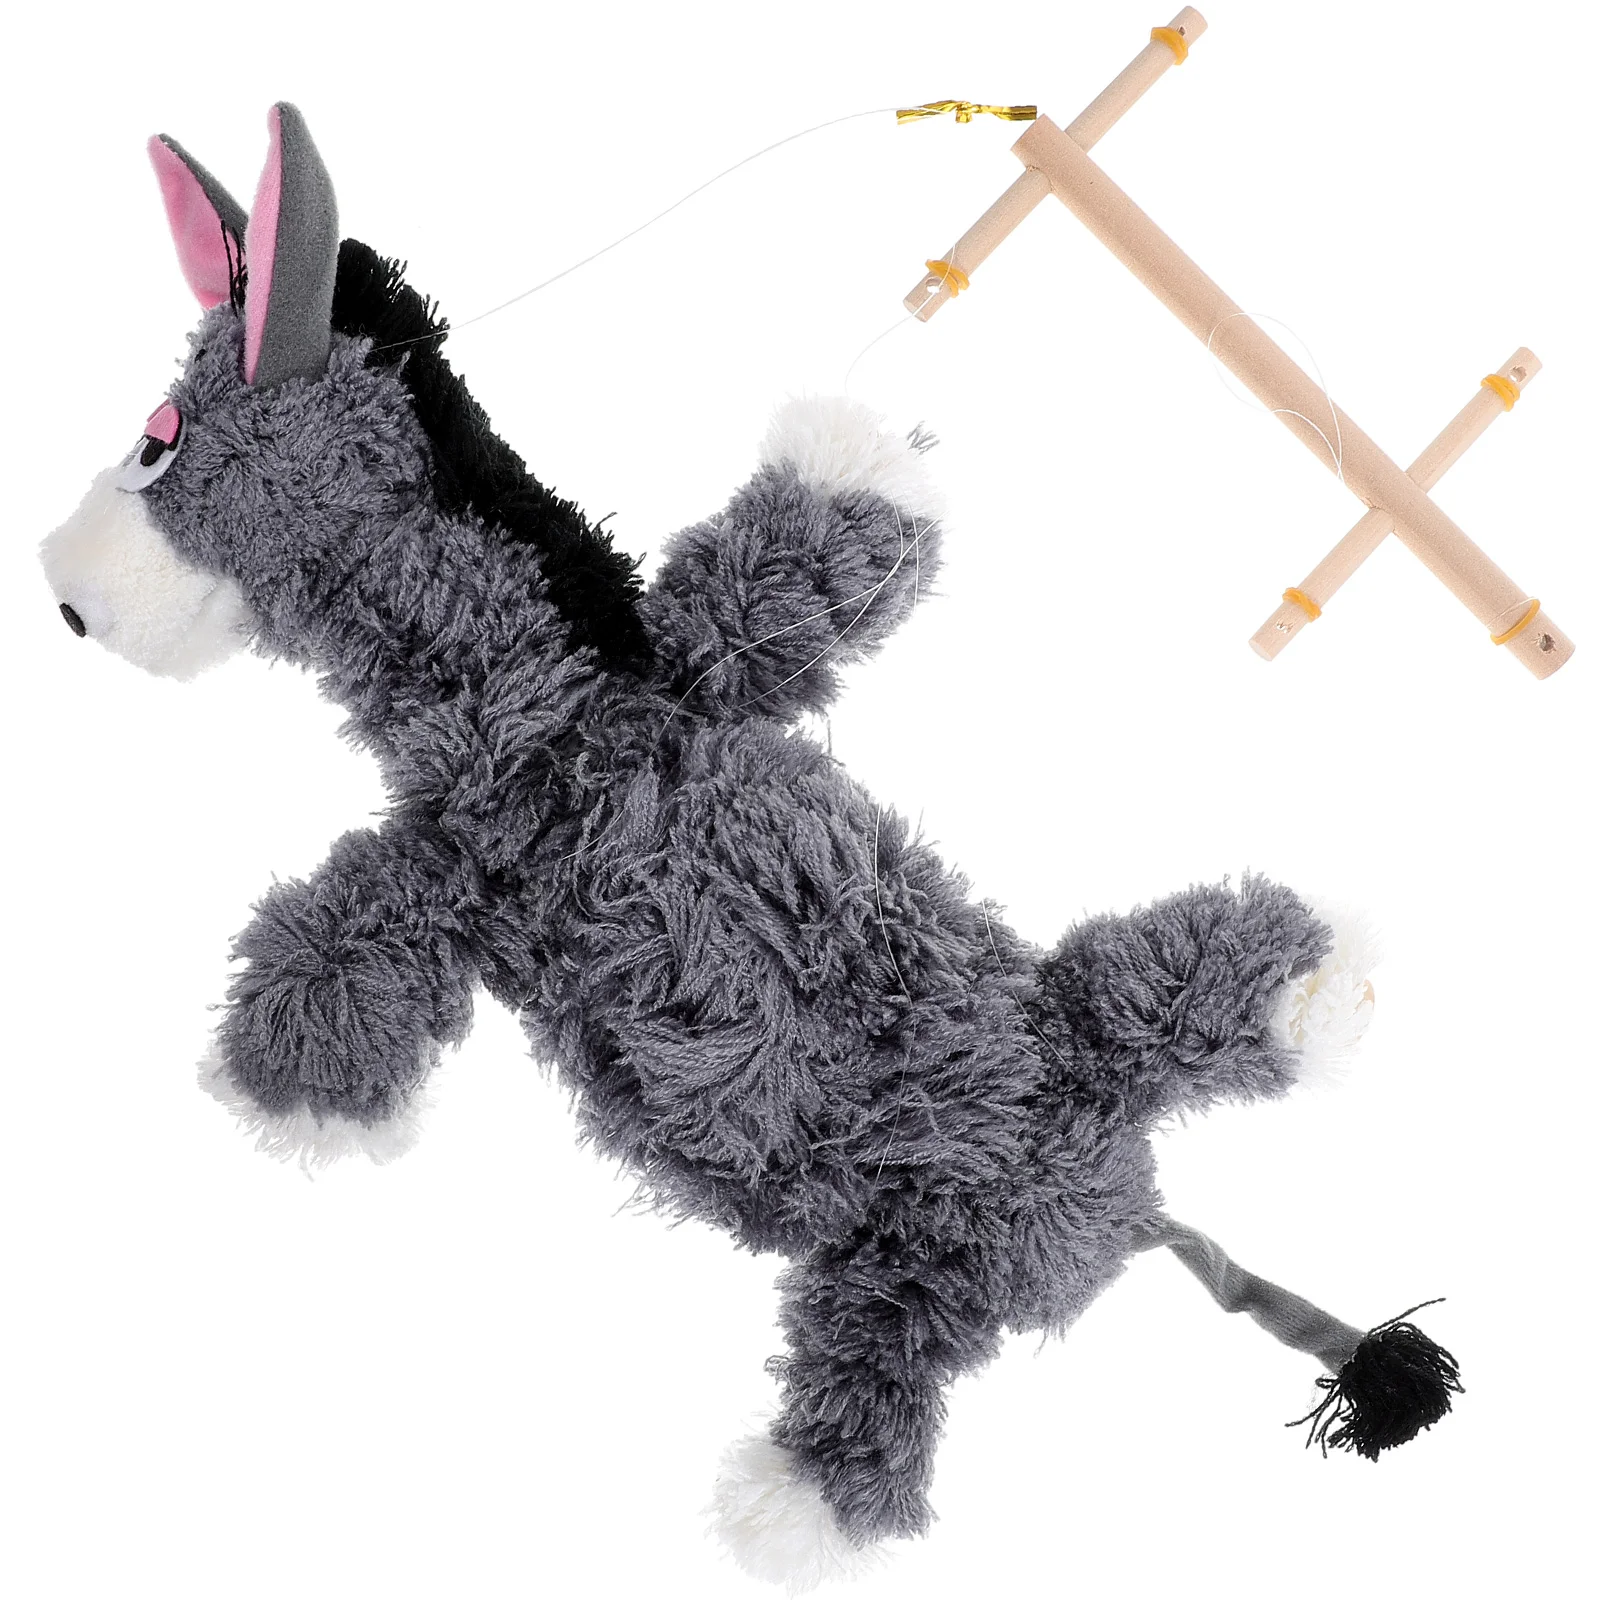 

Marionettes Puppet Toy Animal Design Marionette String Puppets Toy Puppet Show Prop for Kids